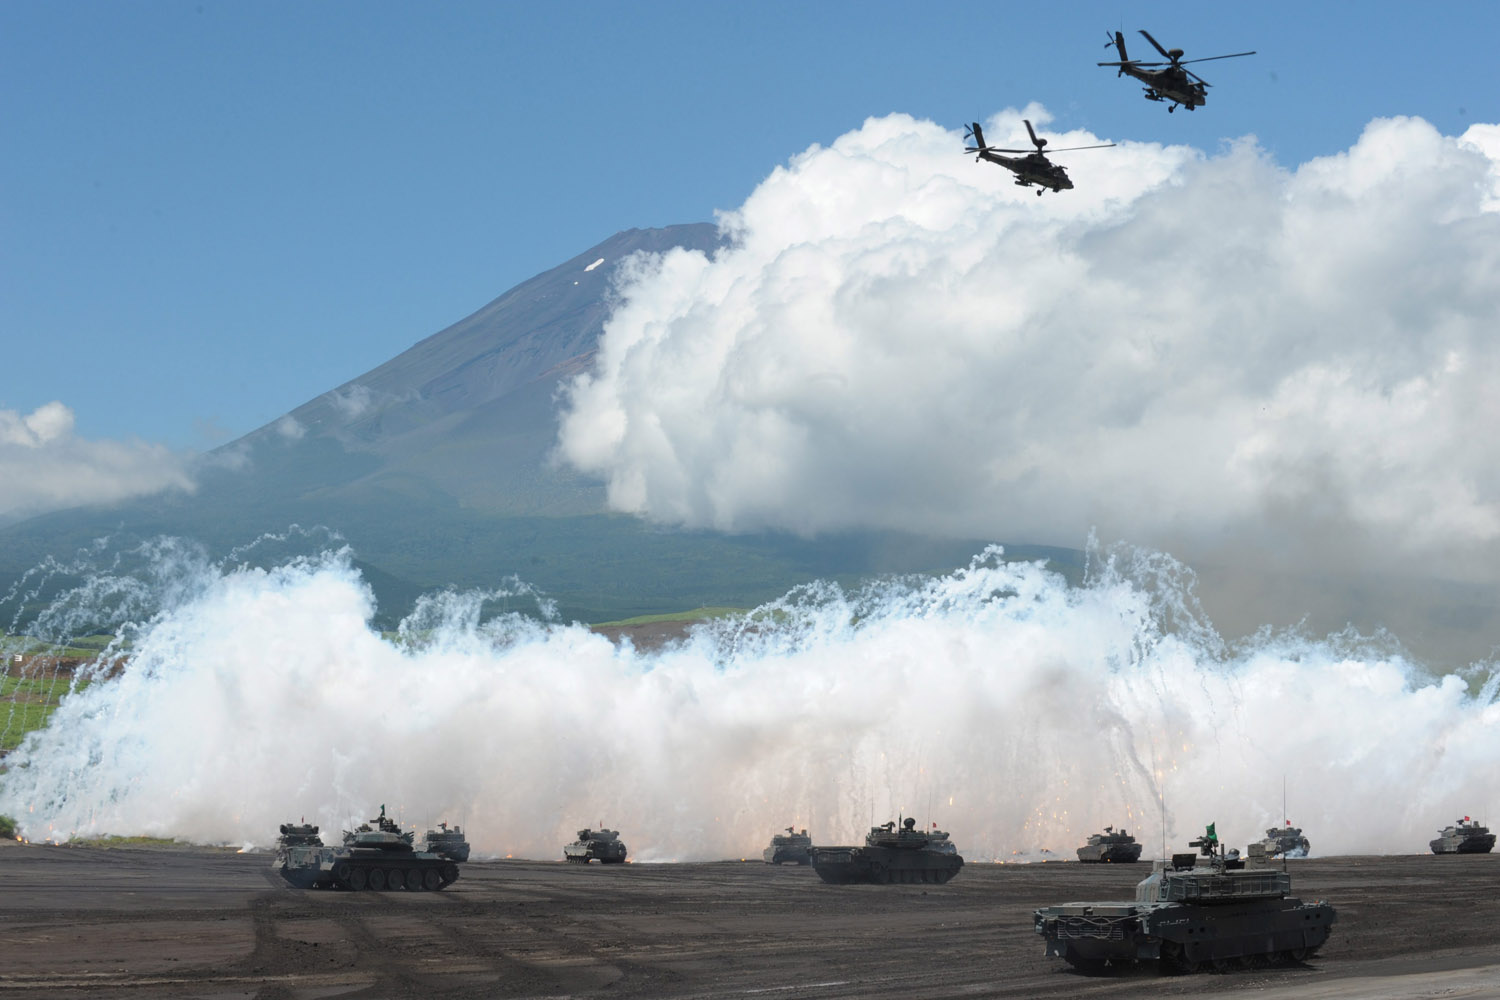 Aug. 21, 2012. Helicopters fly over a field as tanks fire a volley during the annual live fire exercise by the Japan Ground Self-Defense Force (JGSDF) at the foot of Mount Fuji in Gotemba, 100km southwest of Tokyo, Japan.